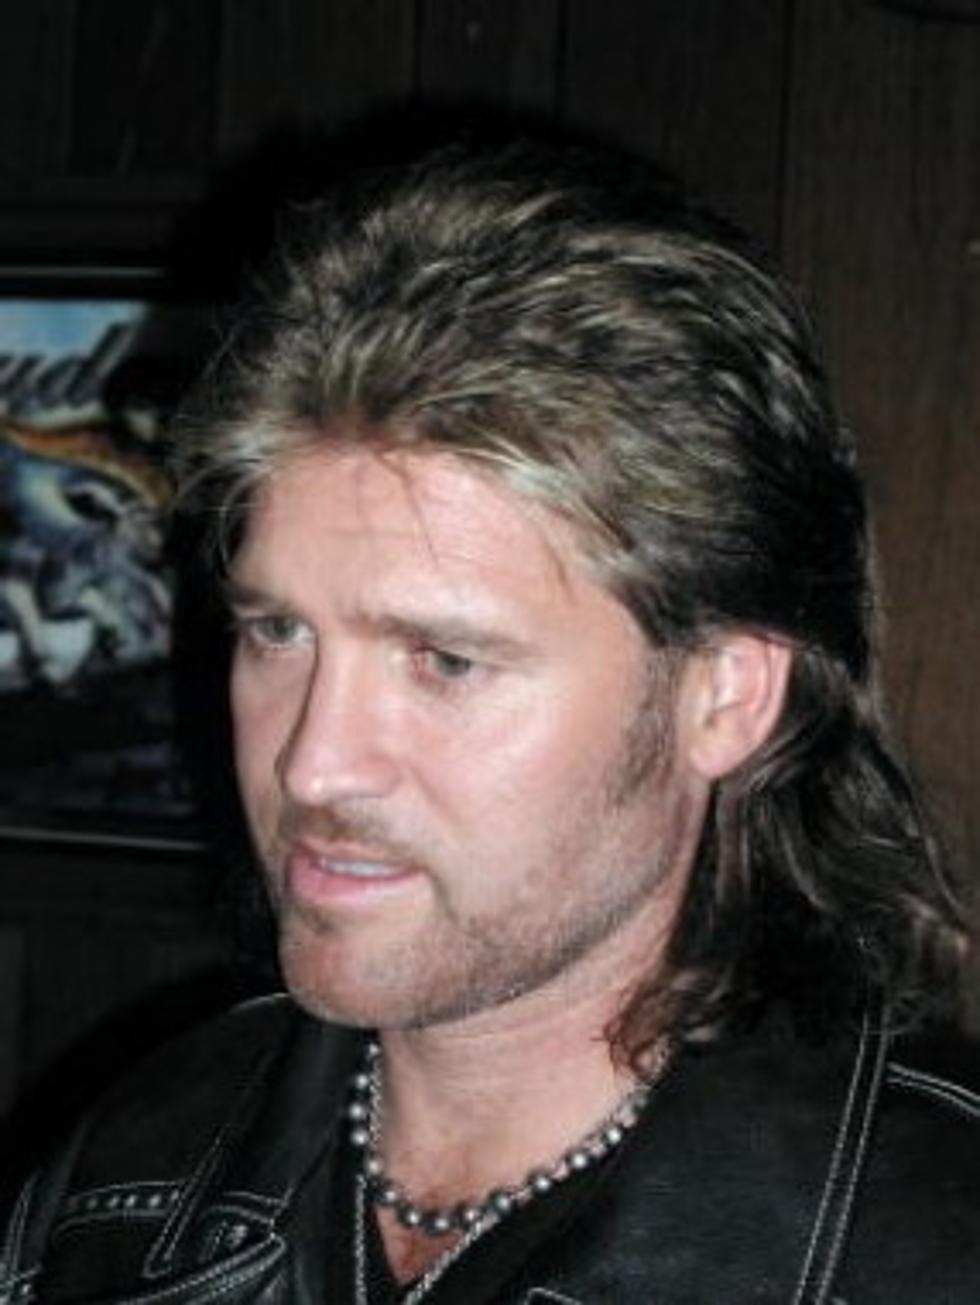 Mullet Fraud! Billy Ray’s Mullet A Phony?